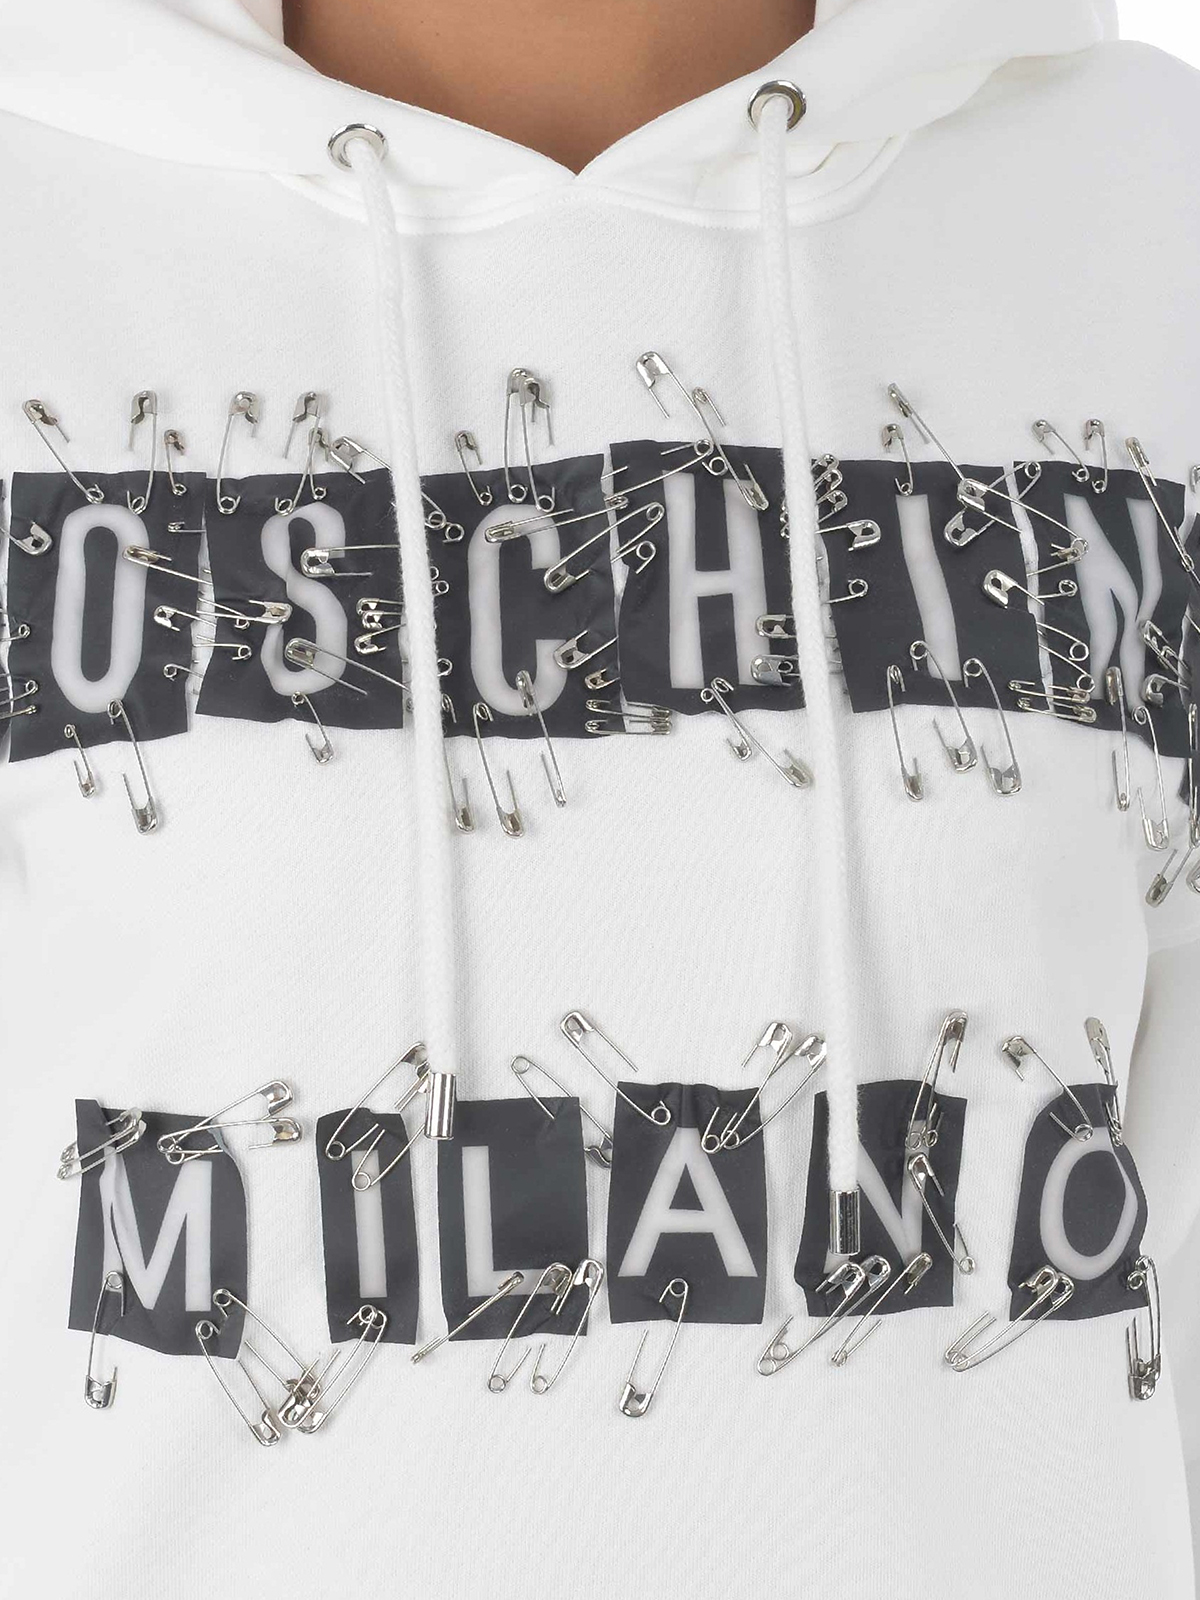 moschino safety pin hoodie